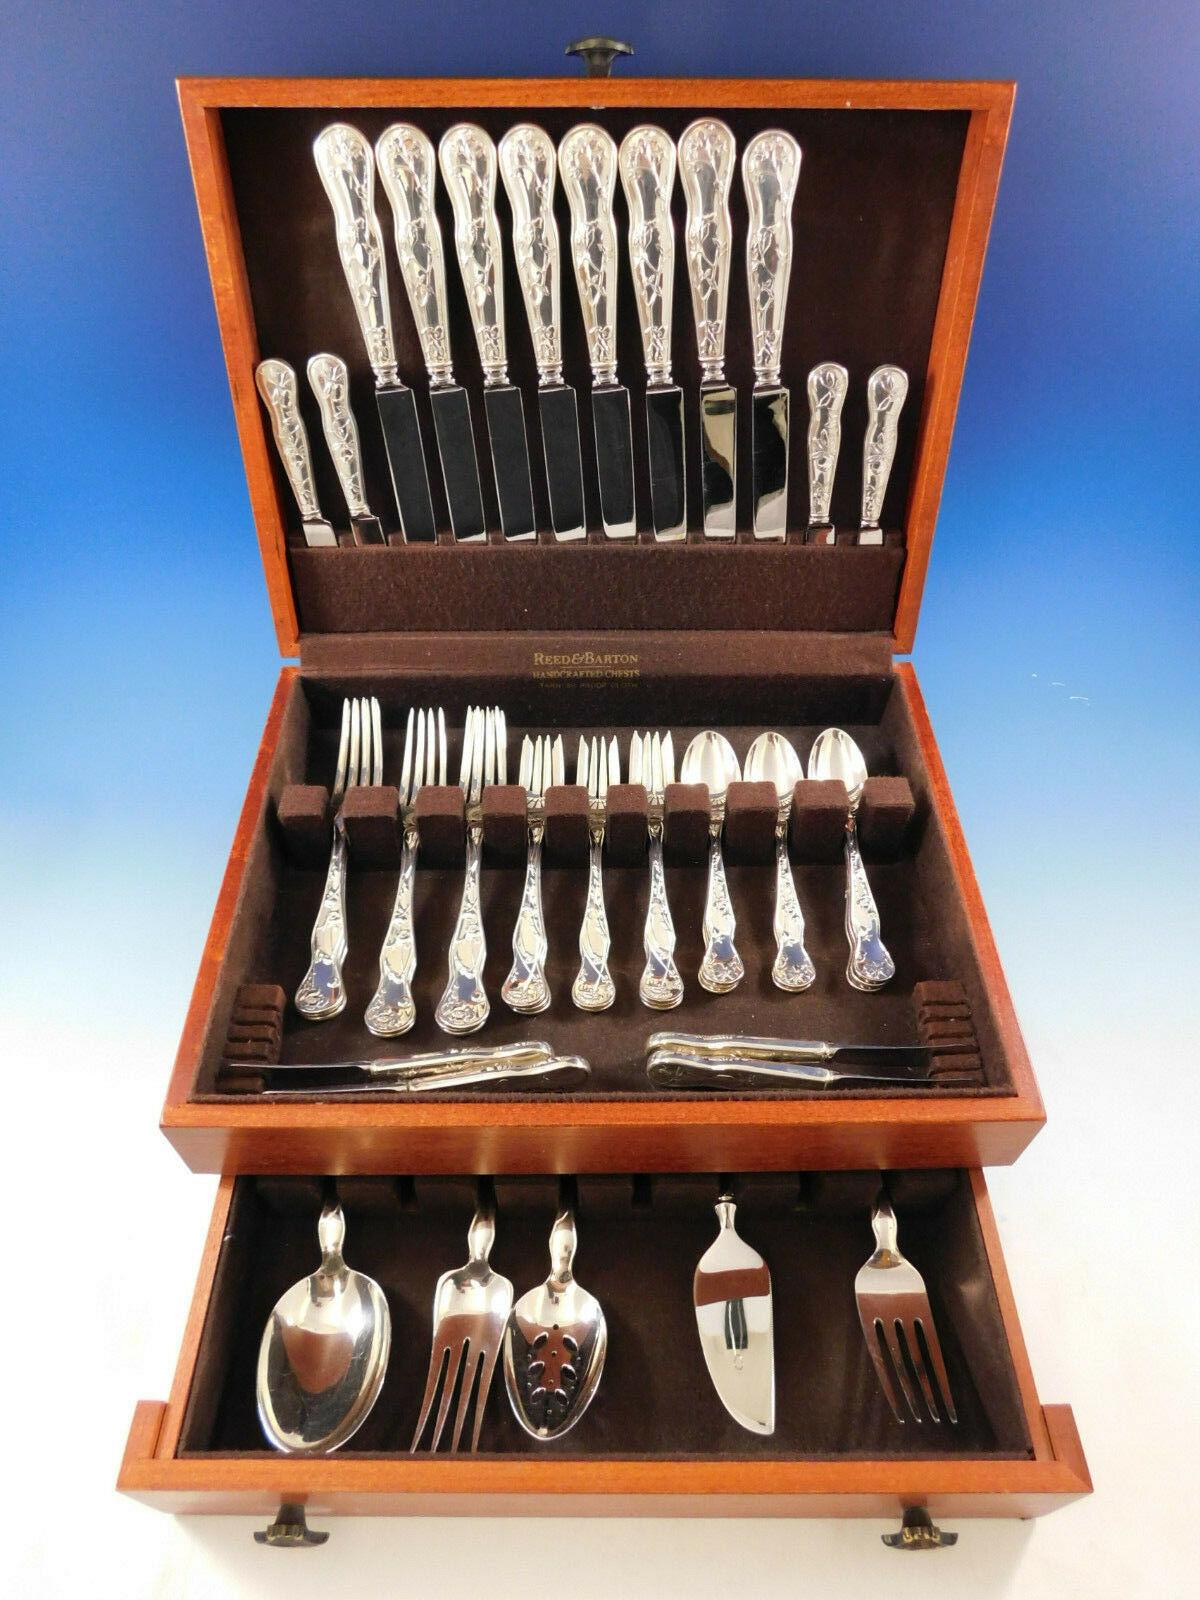 Dinner size American Garden by Tiffany & Co. sterling silver flatware set of 45 pieces. Inspired by the extensive botanical beauty of the United States, each utensil features a different flower. This set includes:

8 dinner knives, 10 1/4